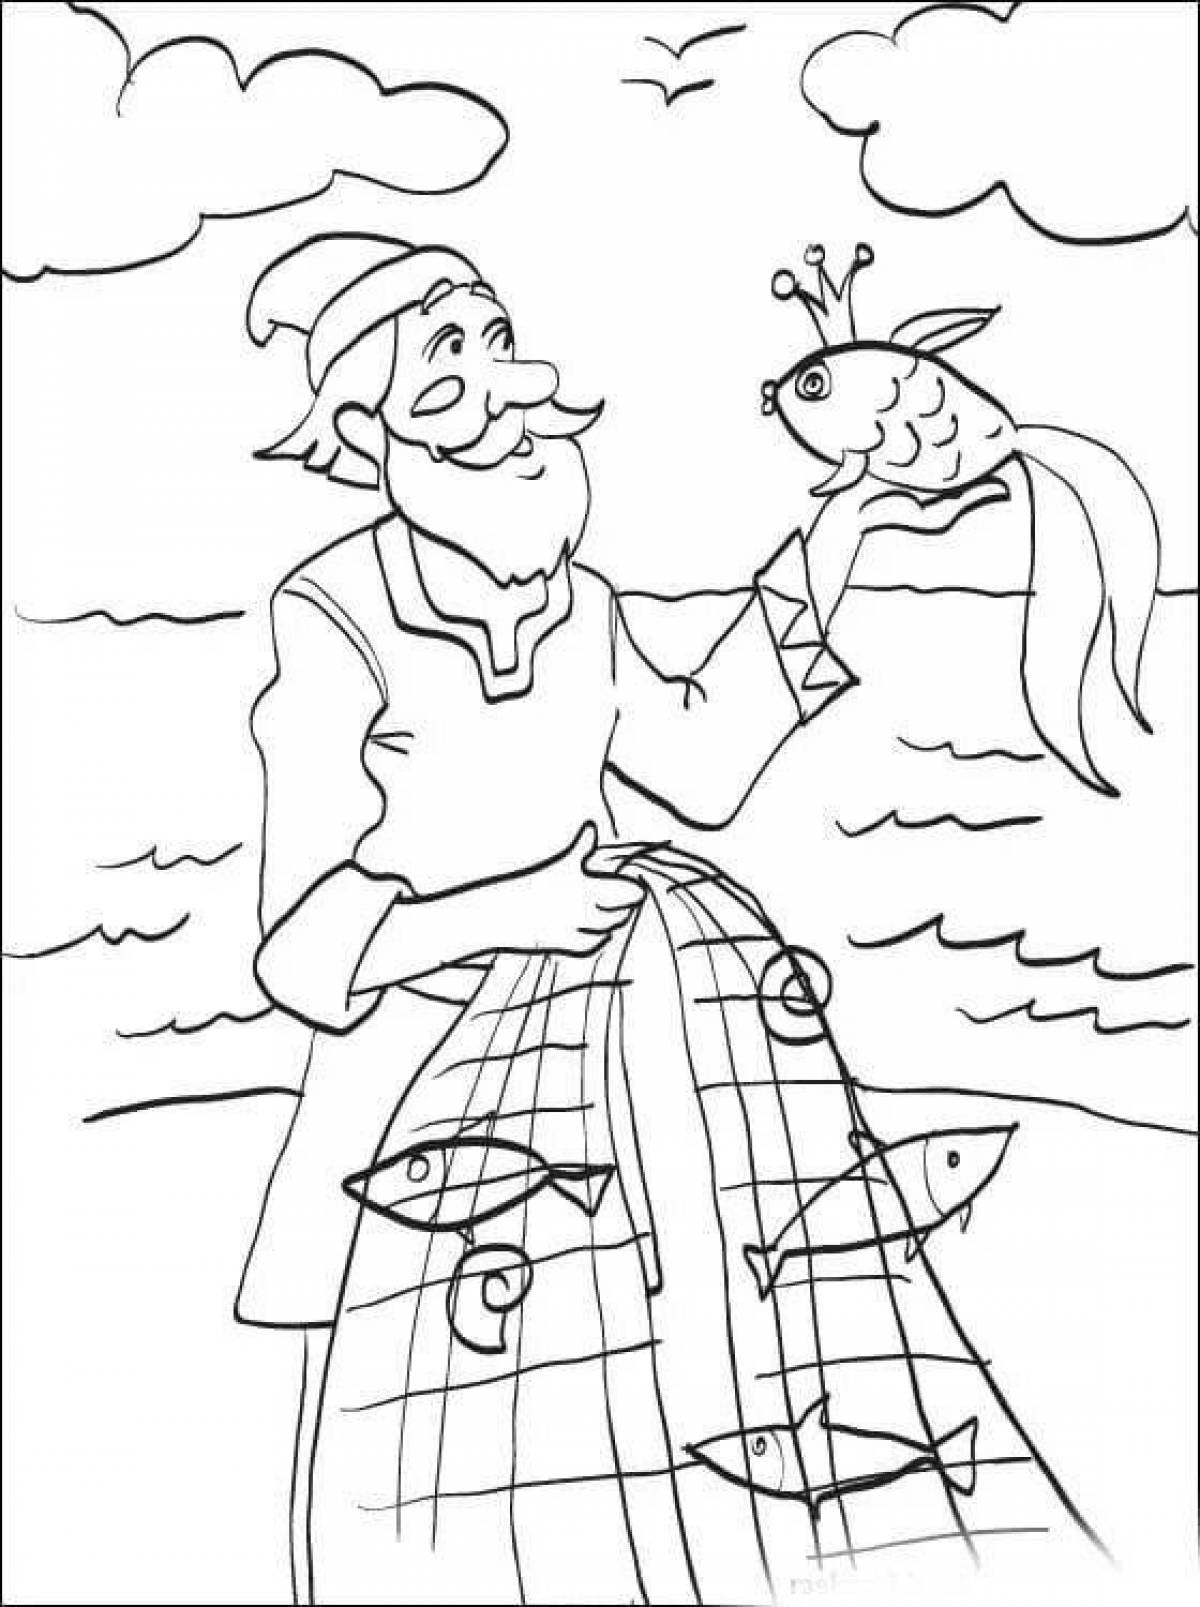 About the fisherman and the fish #8